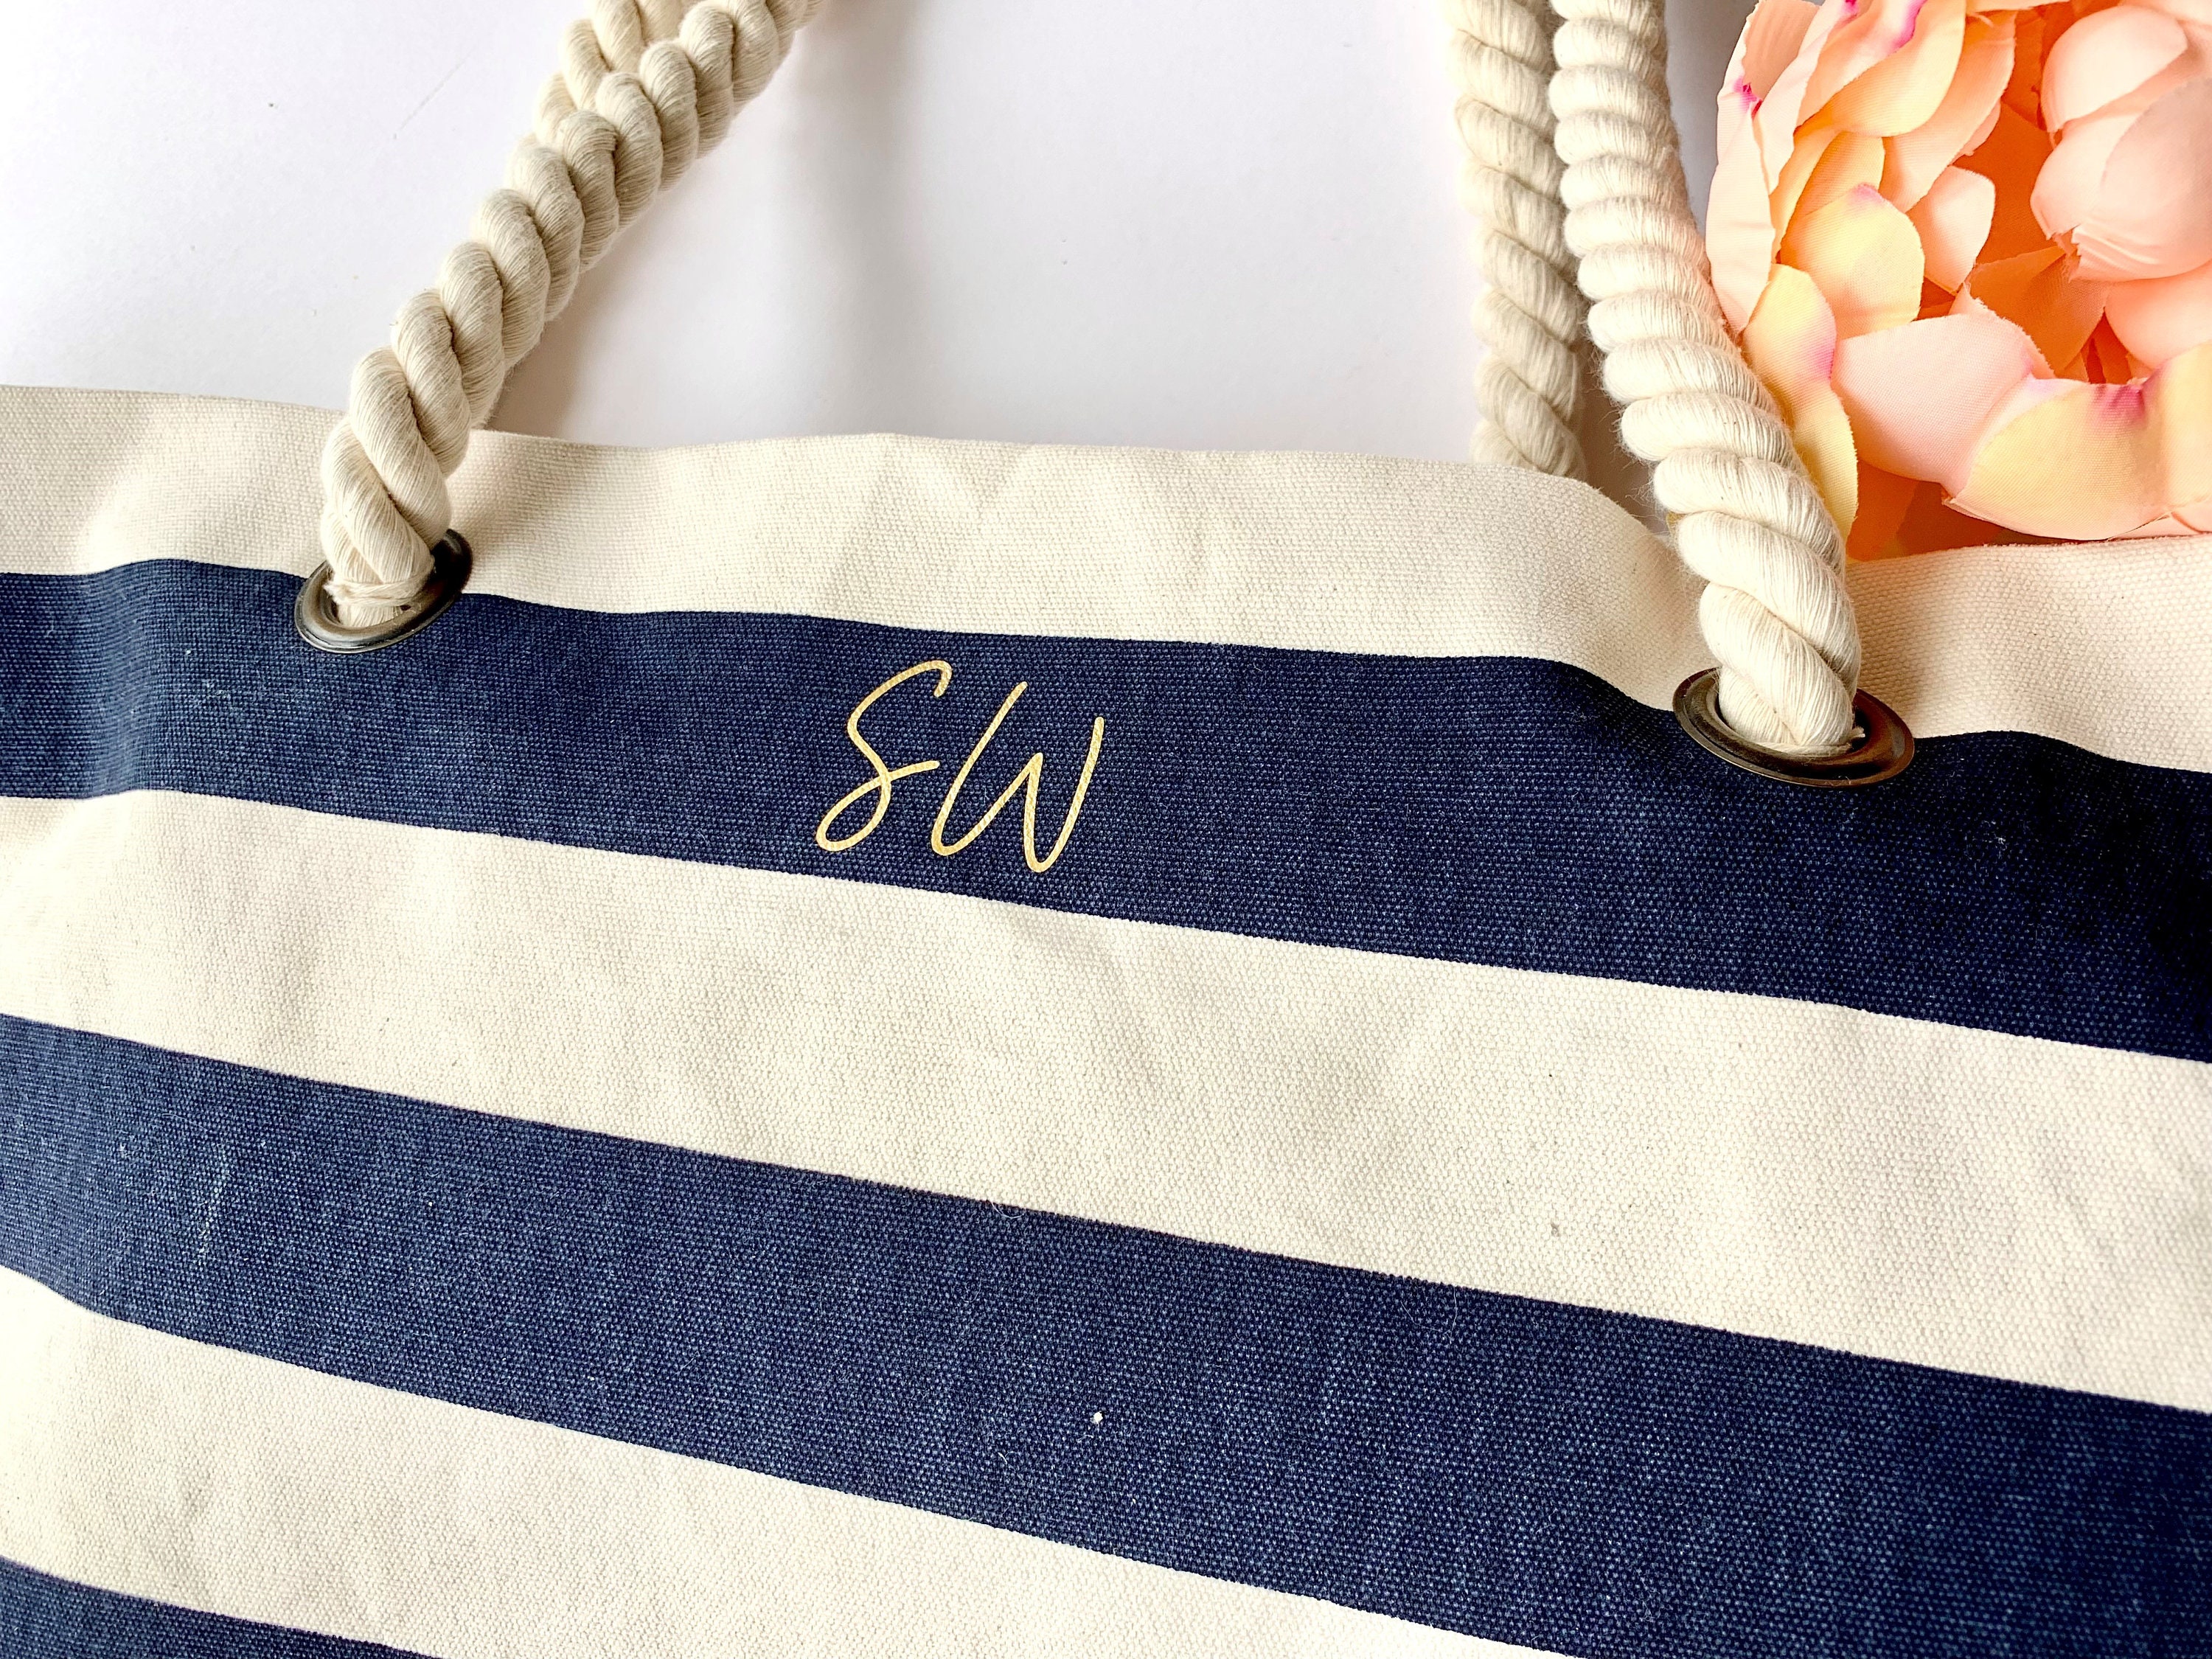 Clearance!SDJMa Initial Printed Canvas Tote Bag, Personalized Shoulder  Handbag with Inner Zipper Pocket & Cotton Handle, Open Beach Bag for  Vacation